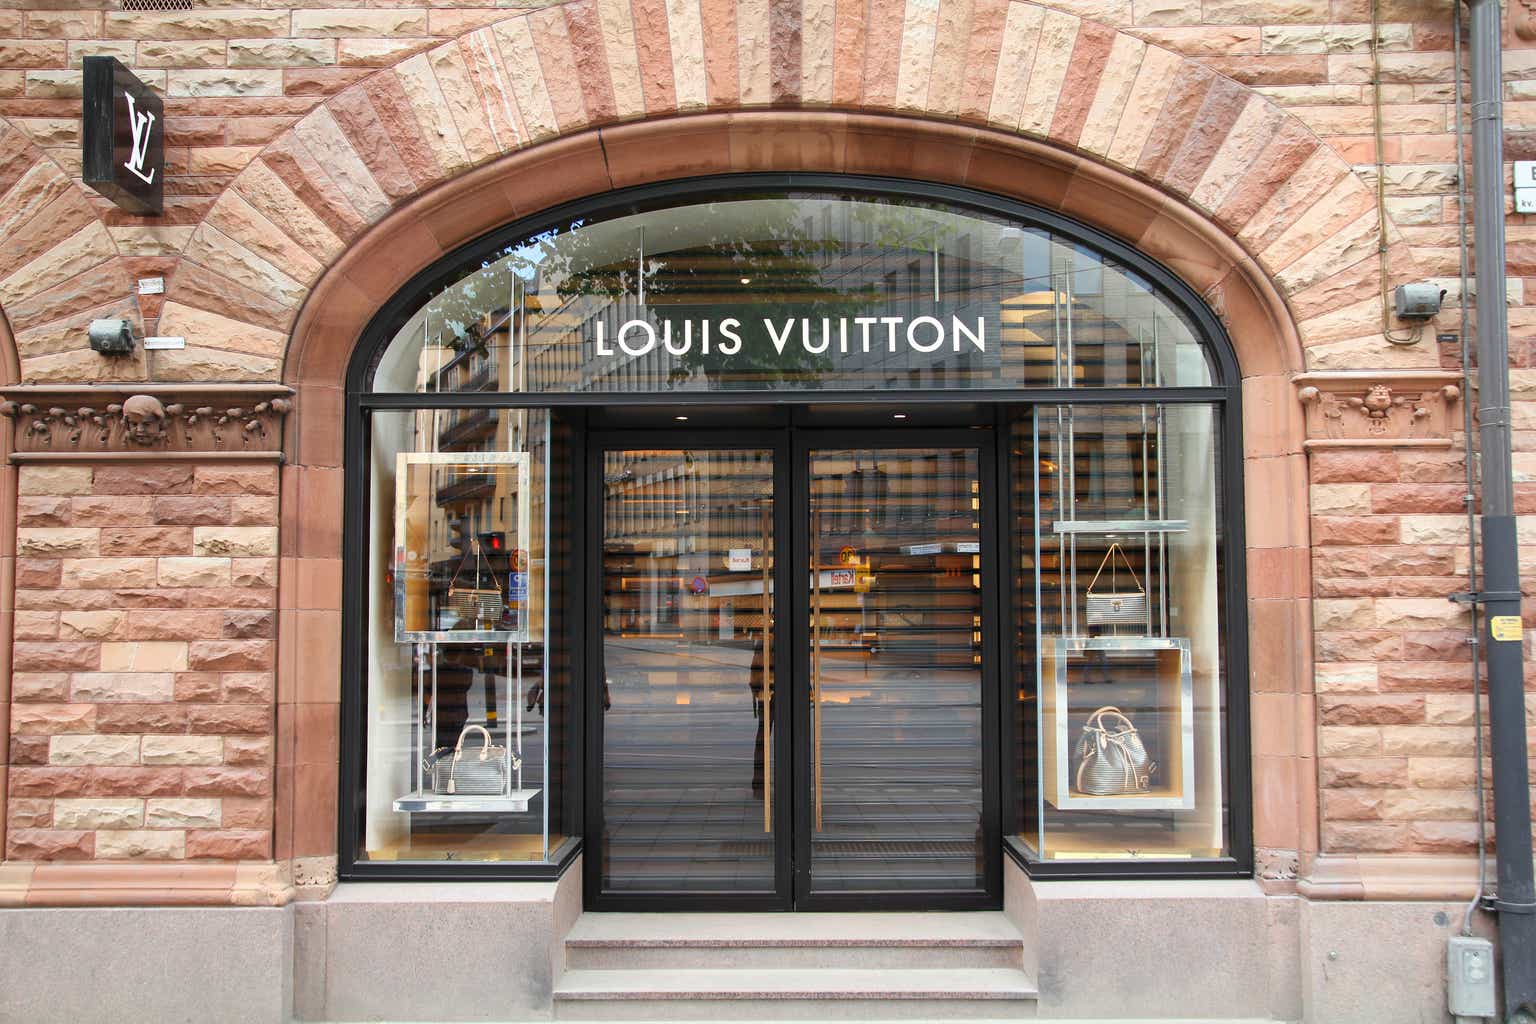 LVMH may have to settle for a more humdrum future